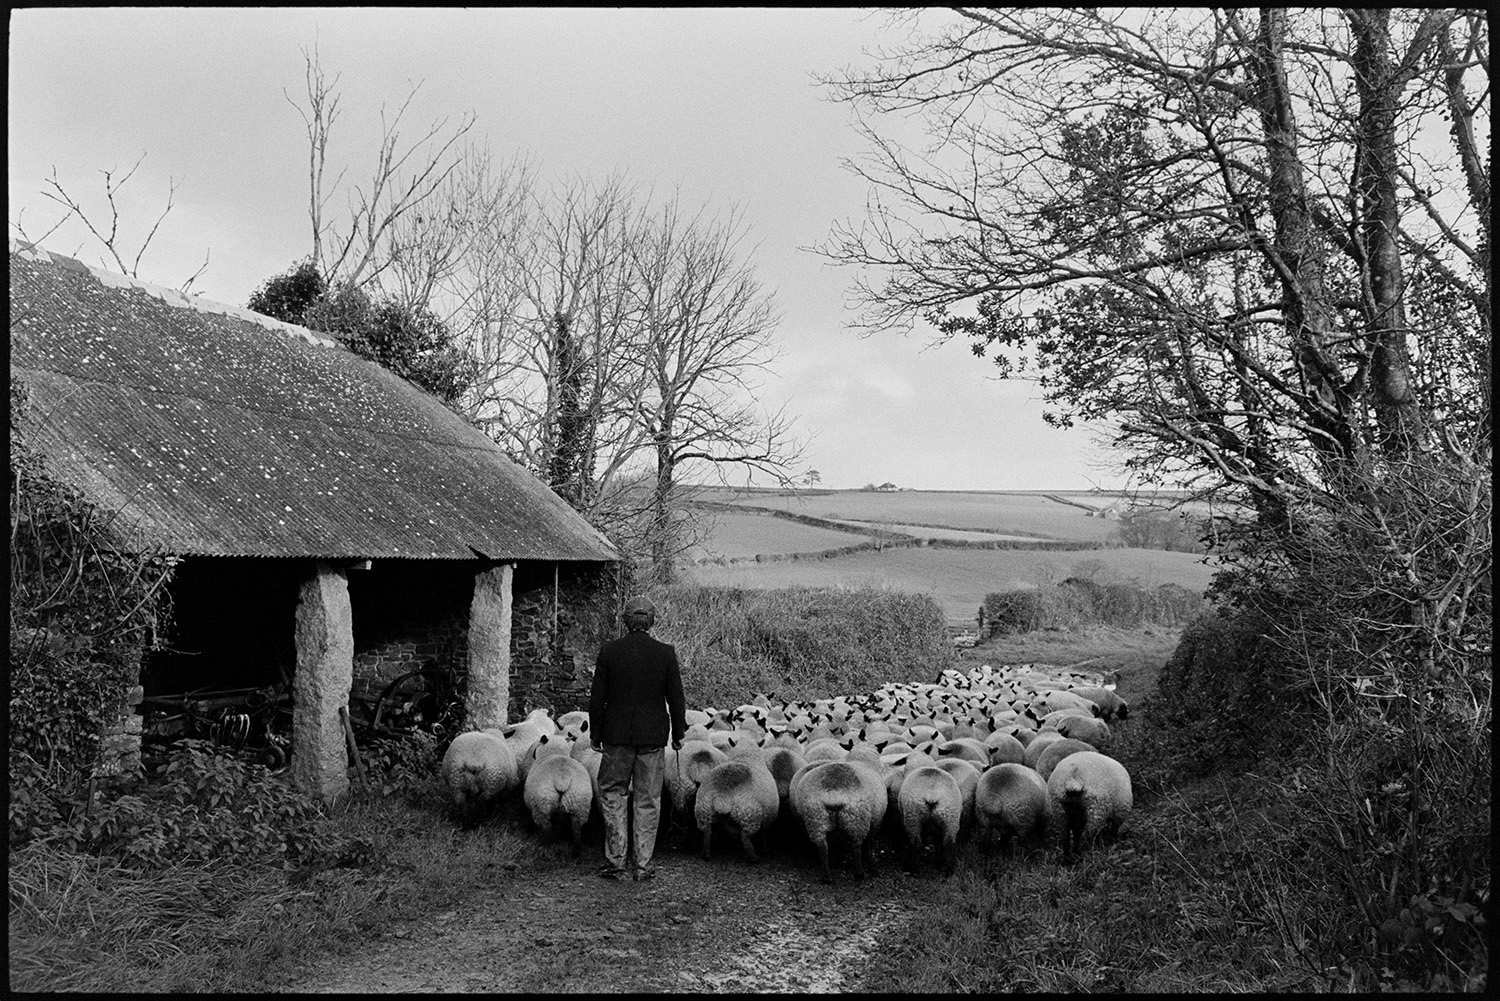 Woman farmer counting sheep flock going down lane to pasture. 
[A member of the Elworthy family herding sheep down a muddy lane to new pasture at Narracott, Hollocombe. They are passing a barn or linhay with stone pillars and a corrugated iron roof.]